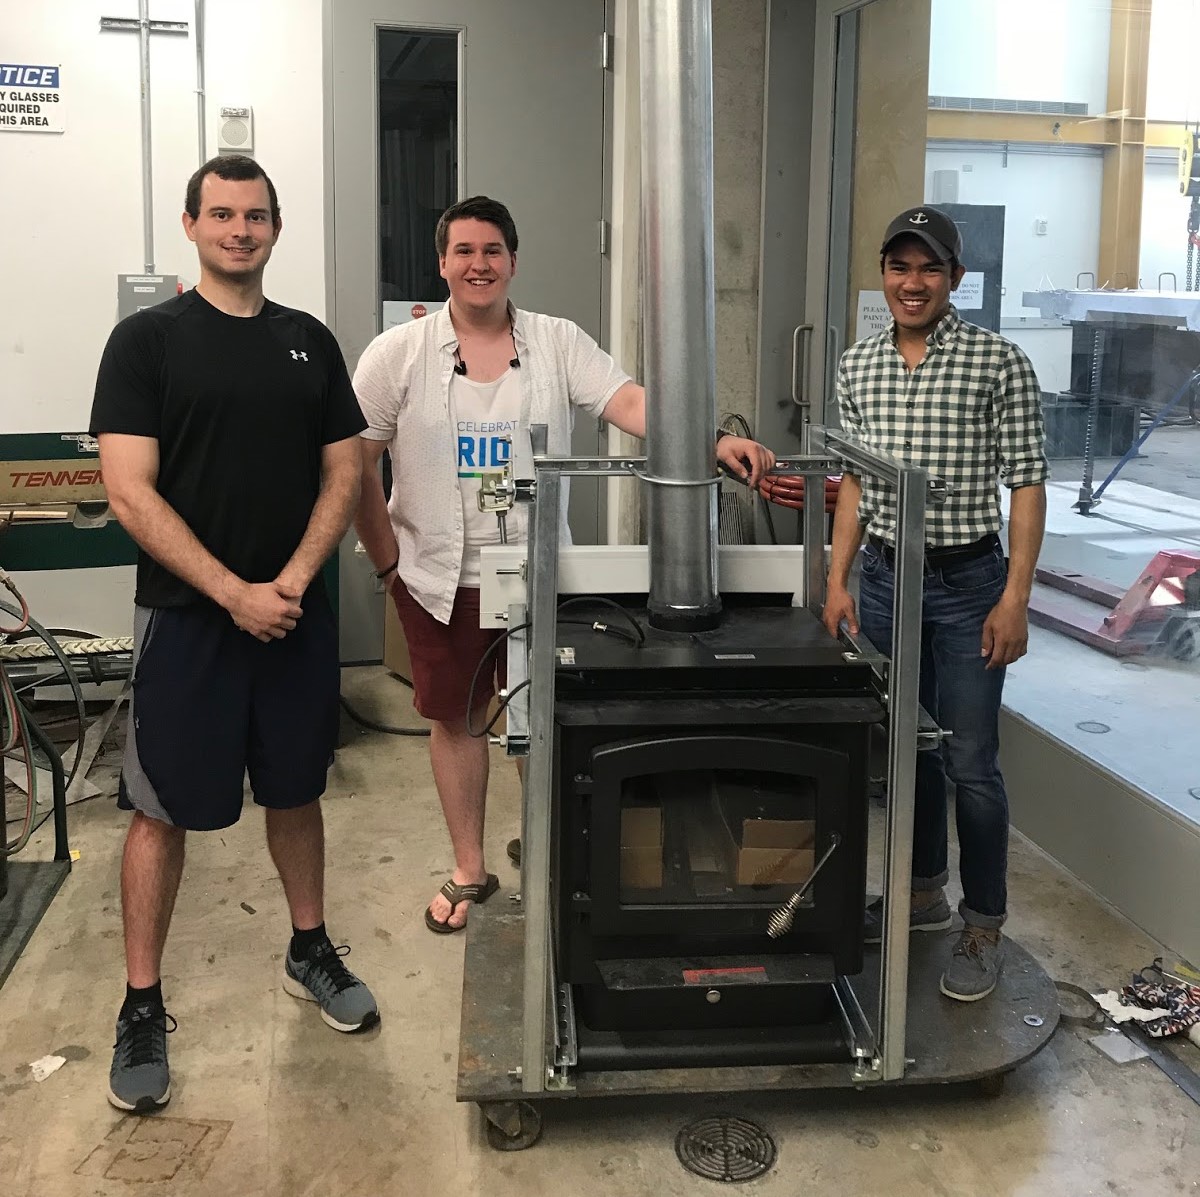 Students from George Washington University School of Engineering and Applied Science’s Department of Mechanical & Aerospace Engineering (GWU SEAS MAE) and their thermoelectric stove.